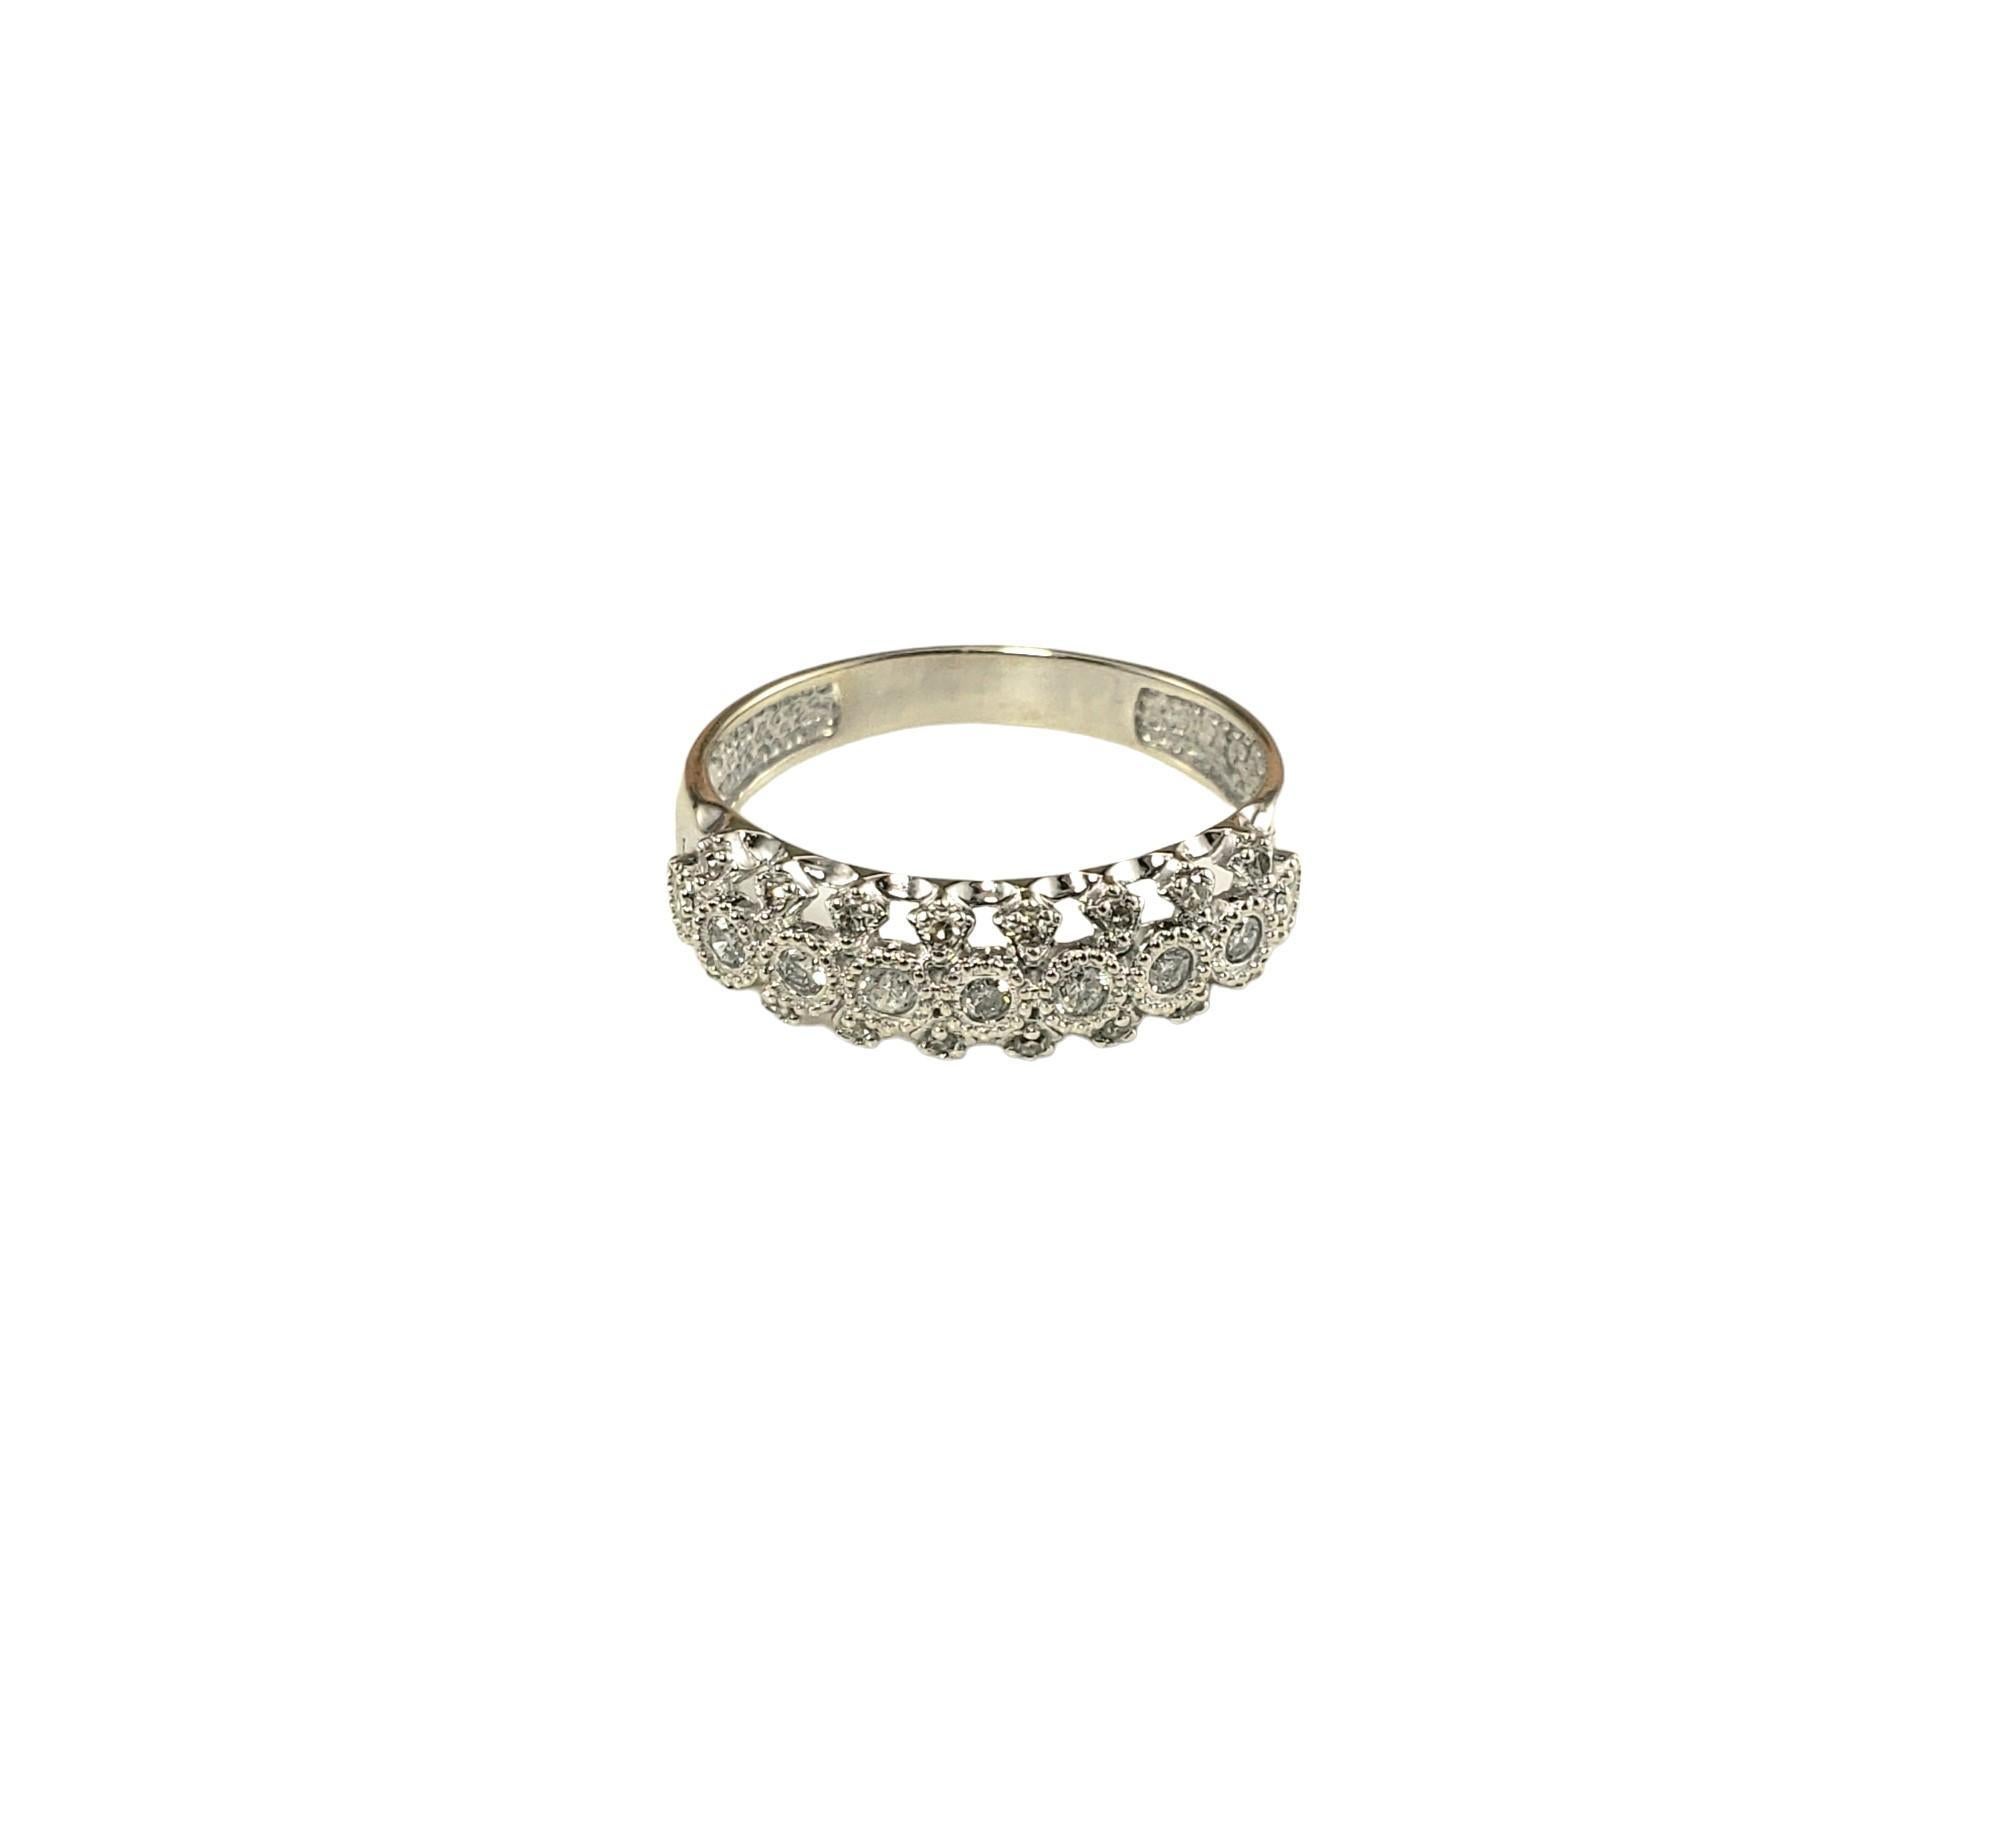 Vintage 14K White Gold and Diamond Ring Size 8-

This sparkling ring features 25 round and single cut diamonds set in beautifully detailed 14K white gold.  

Width: 6 mm.  

Shank: 3 mm.

Approximate total diamond weight: .26 ct.

Diamond color: